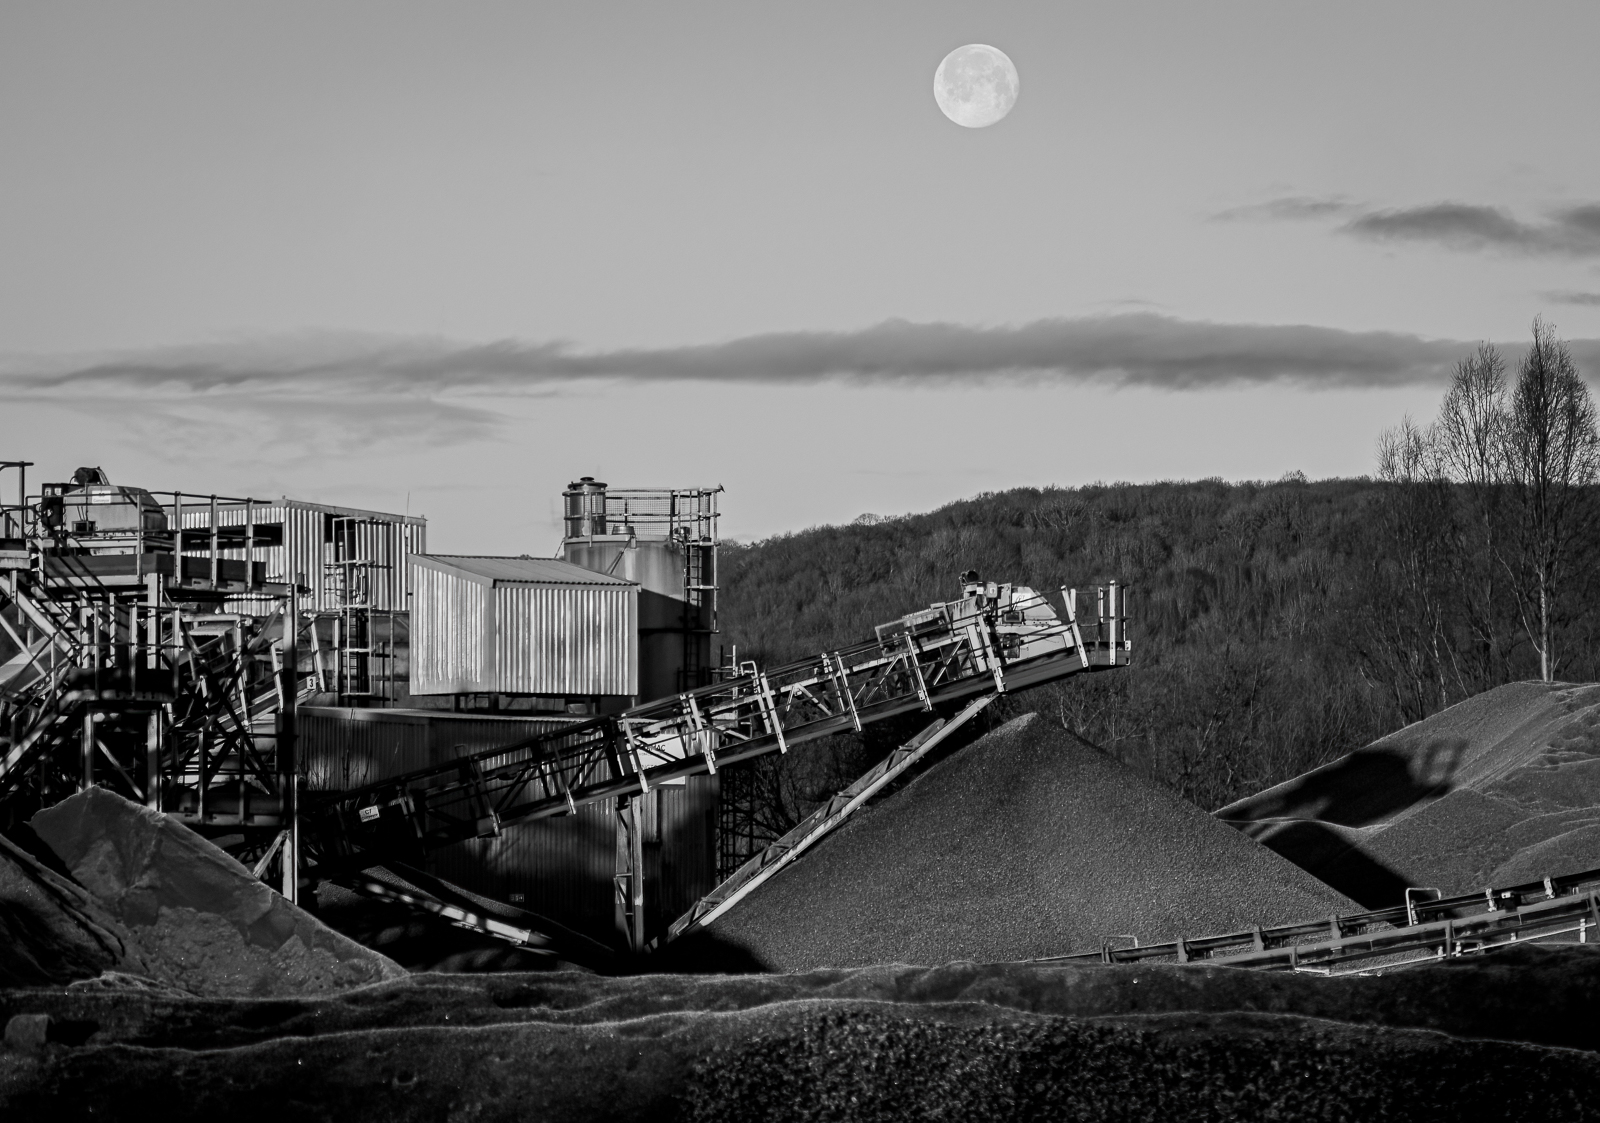 A moonlit night at the gravel pits-.jpg